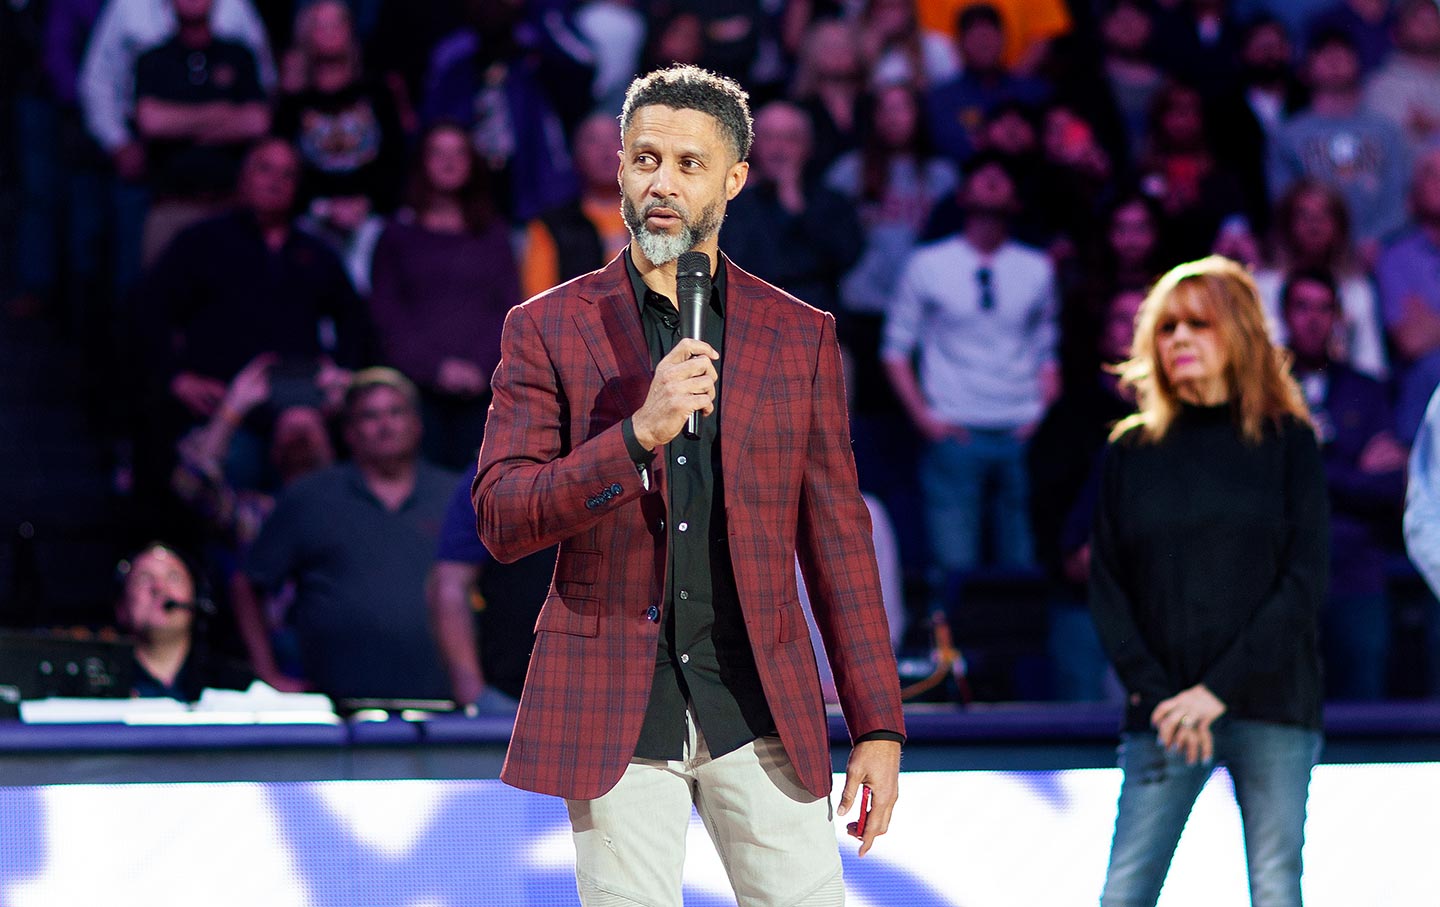 Mahmoud Abdul-Rauf on This Moment of Sports and Struggle